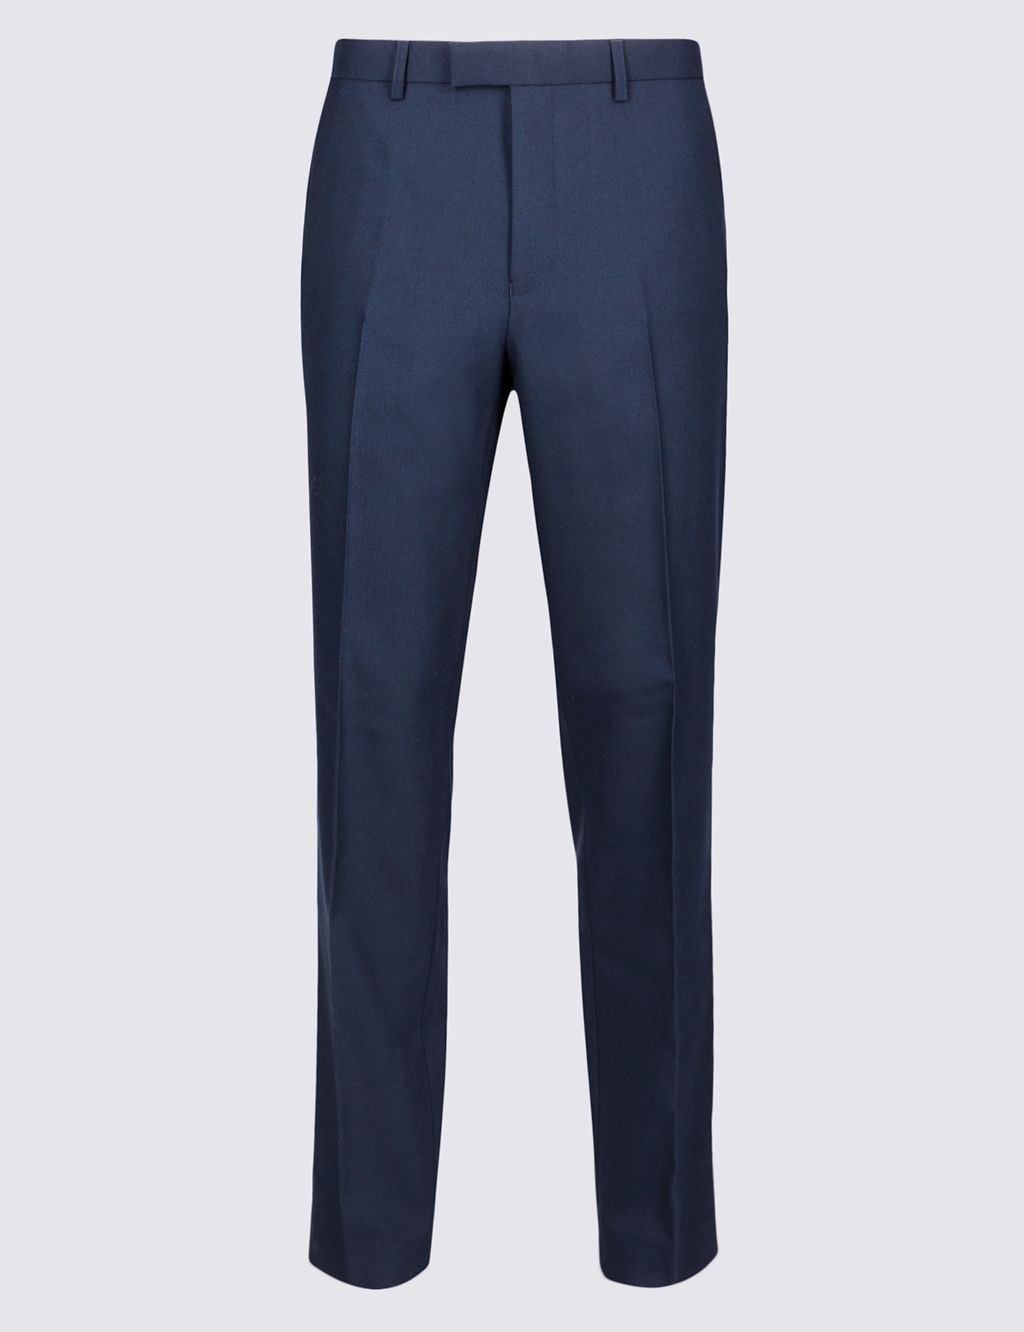 Navy Textured Slim Fit Trousers 1 of 5